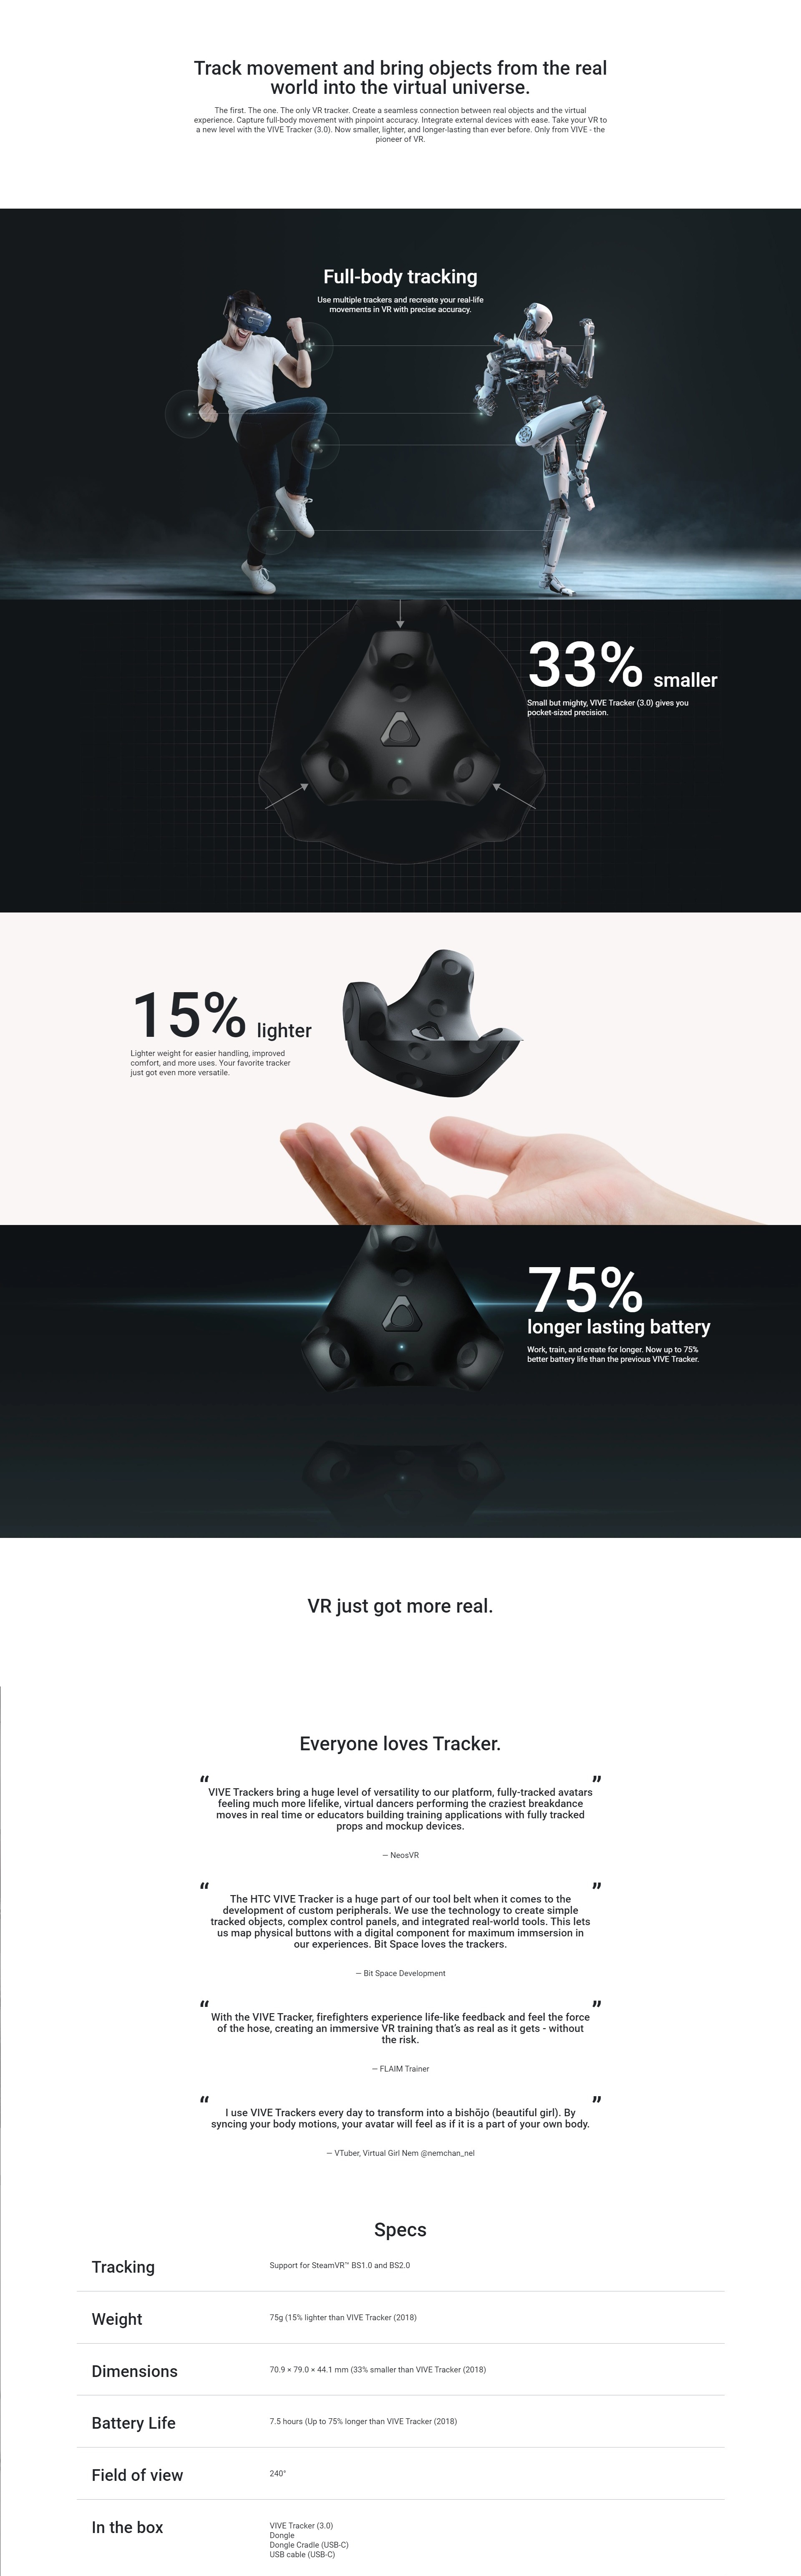 A large marketing image providing additional information about the product HTC VIVE Tracker 3.0 - Additional alt info not provided